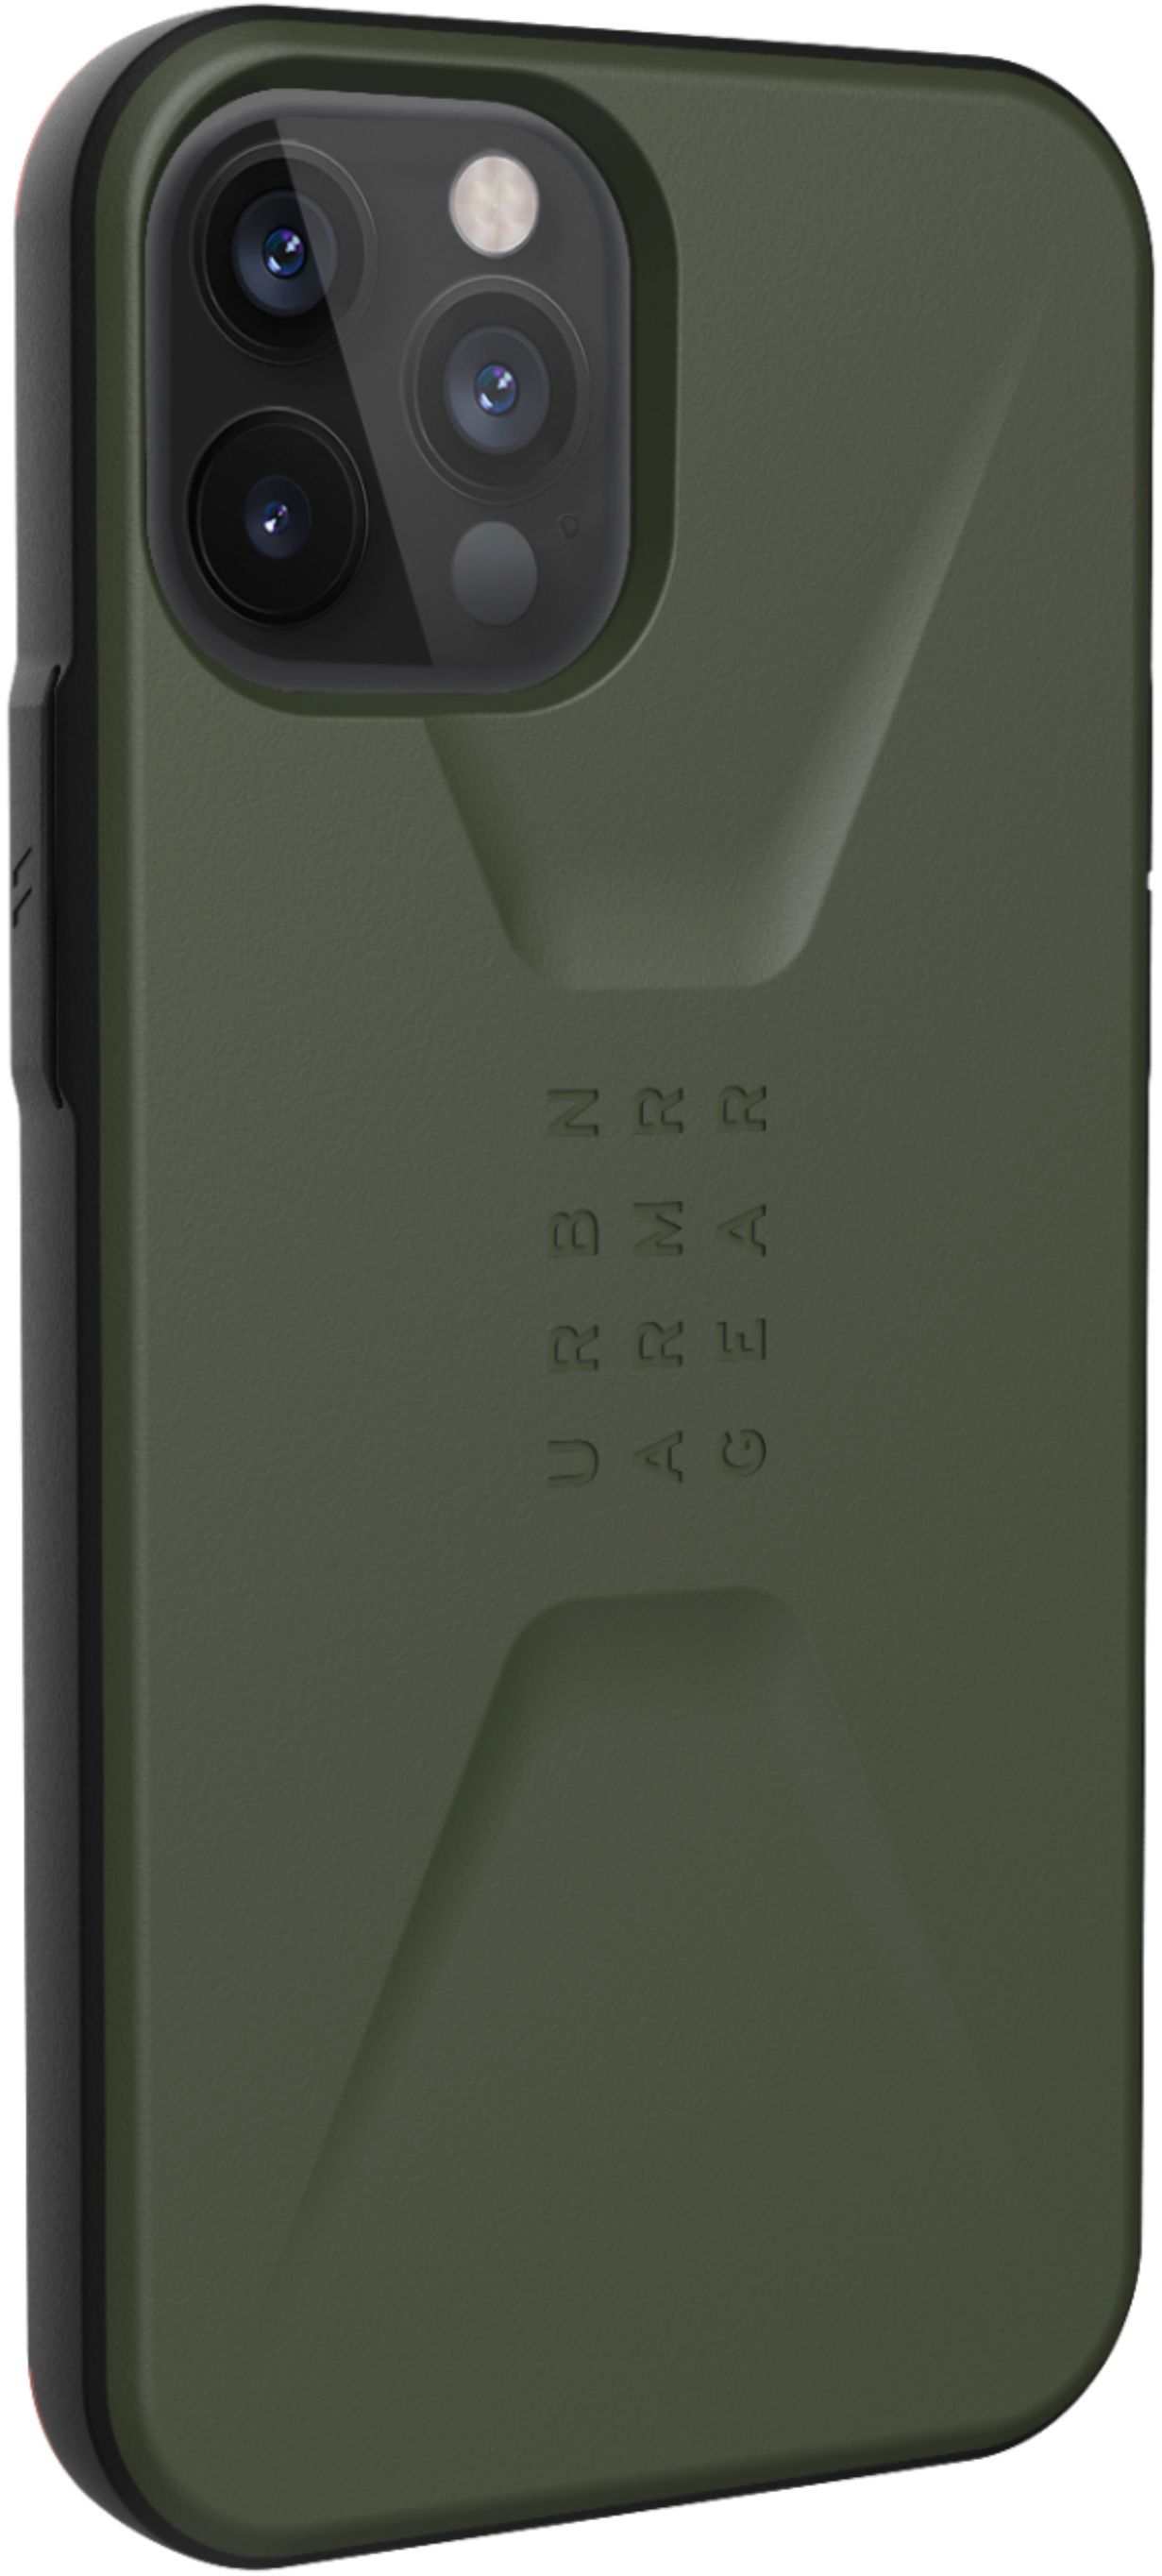 Left View: UAG - Civilian Series Hard shell Case for iPhone 12 Pro Max - Olive